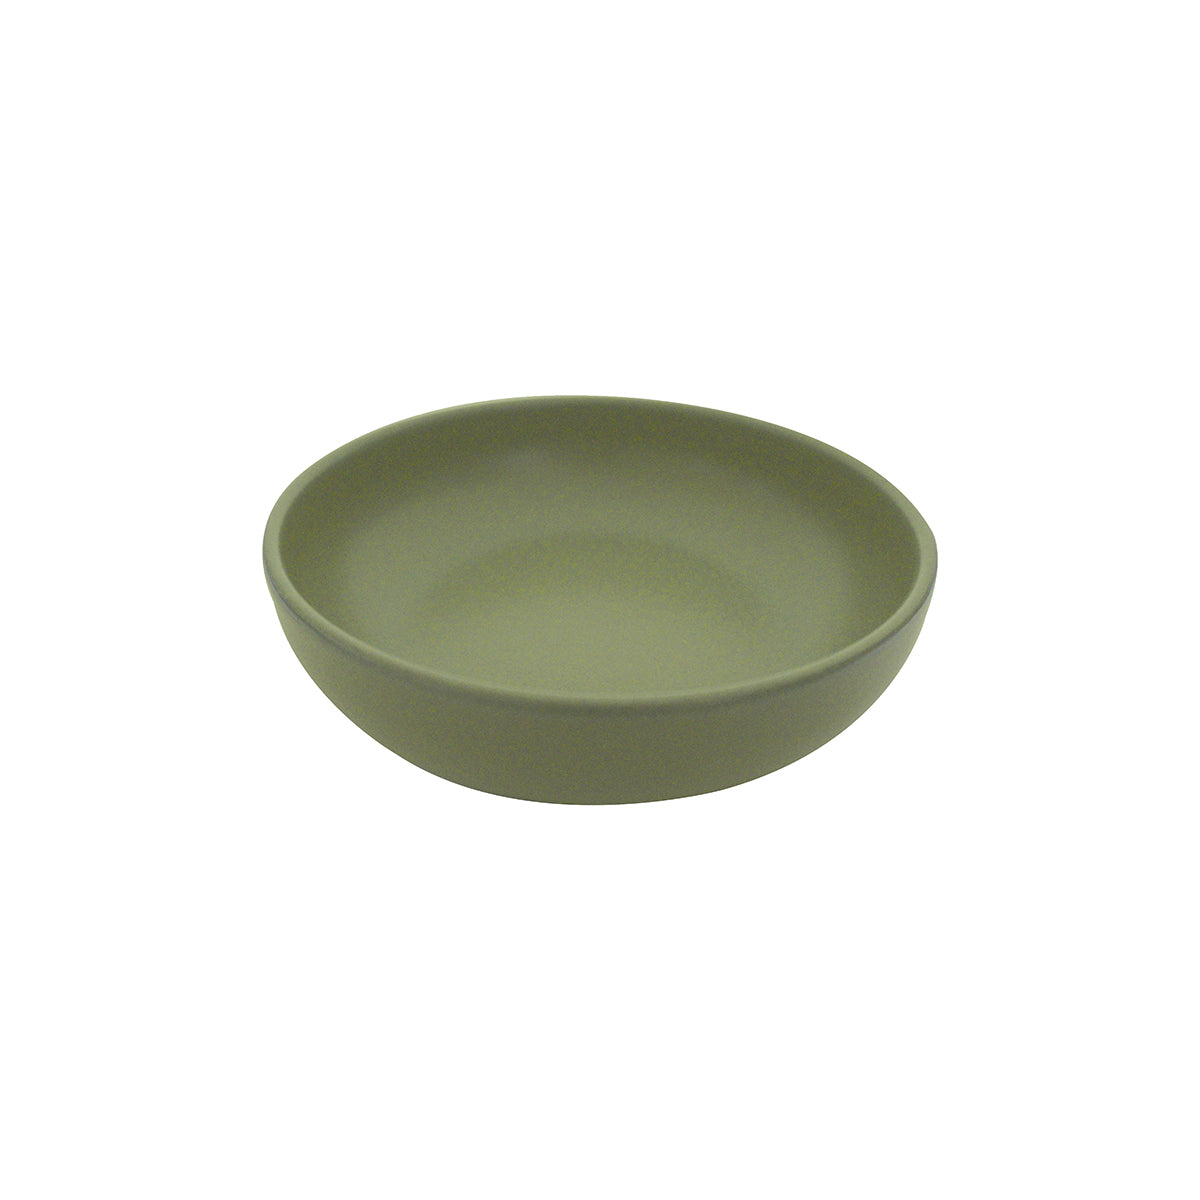 Round Bowl - 160mm, Green, Eclipse from Eclipse. made out of Ceramic and sold in boxes of 6. Hospitality quality at wholesale price with The Flying Fork! 